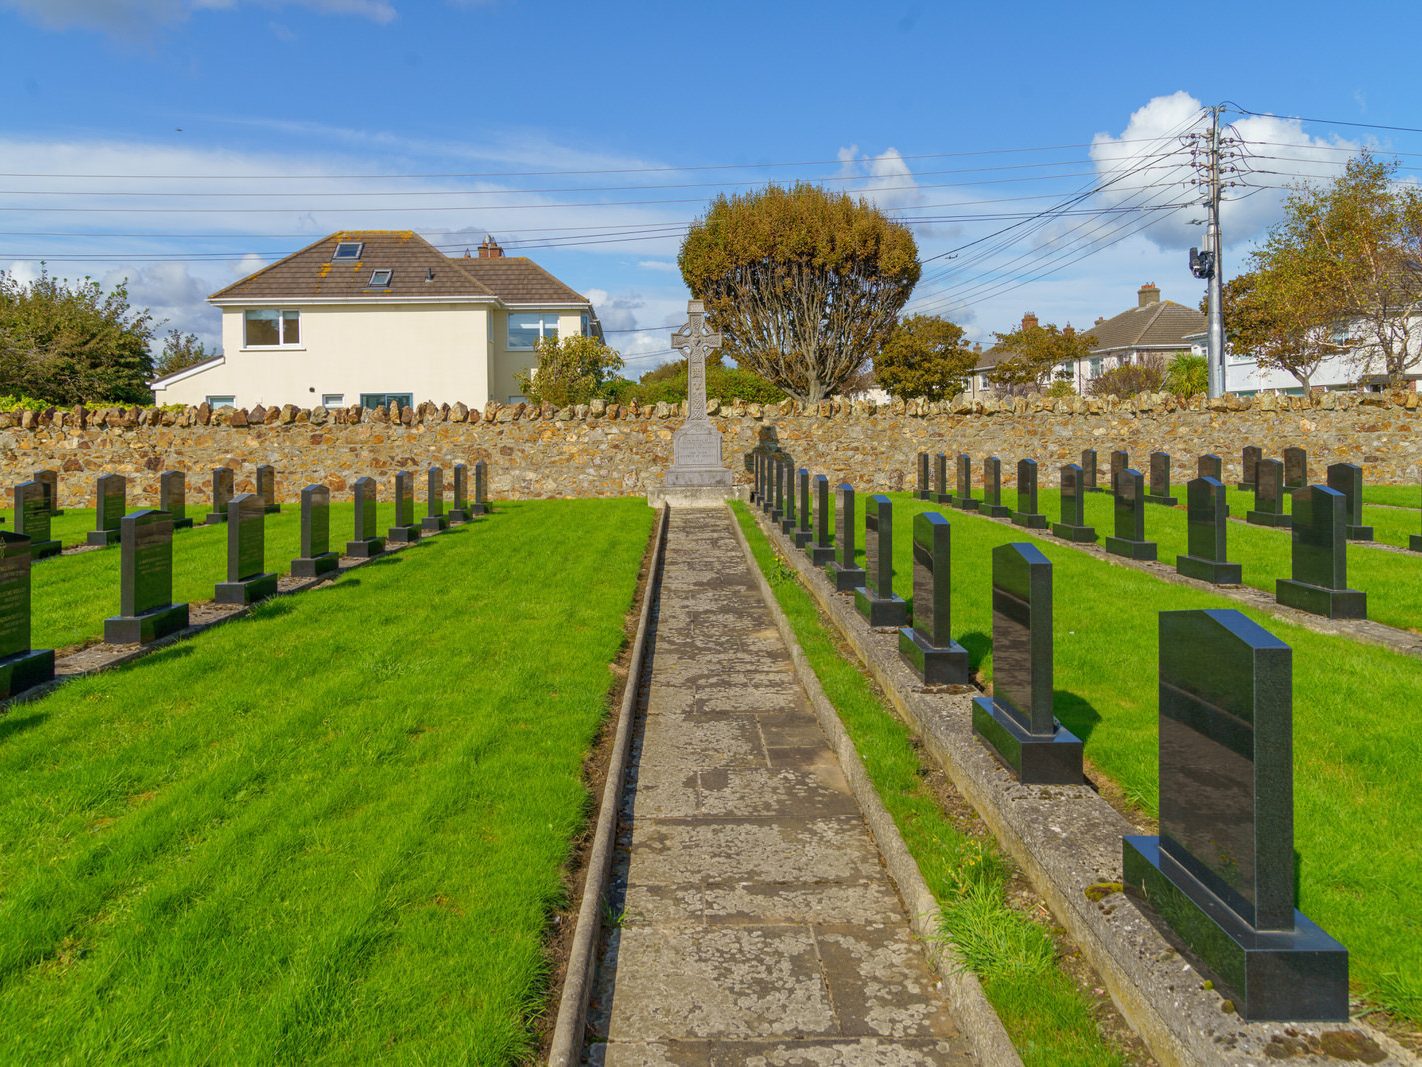 TODAY I MANAGED TO VISIT KILBARRACK CEMETERY [AFTER A NUMBER OF FAILED ATTEMPTS OVER A PERIOD OF TEN YEARS] 041